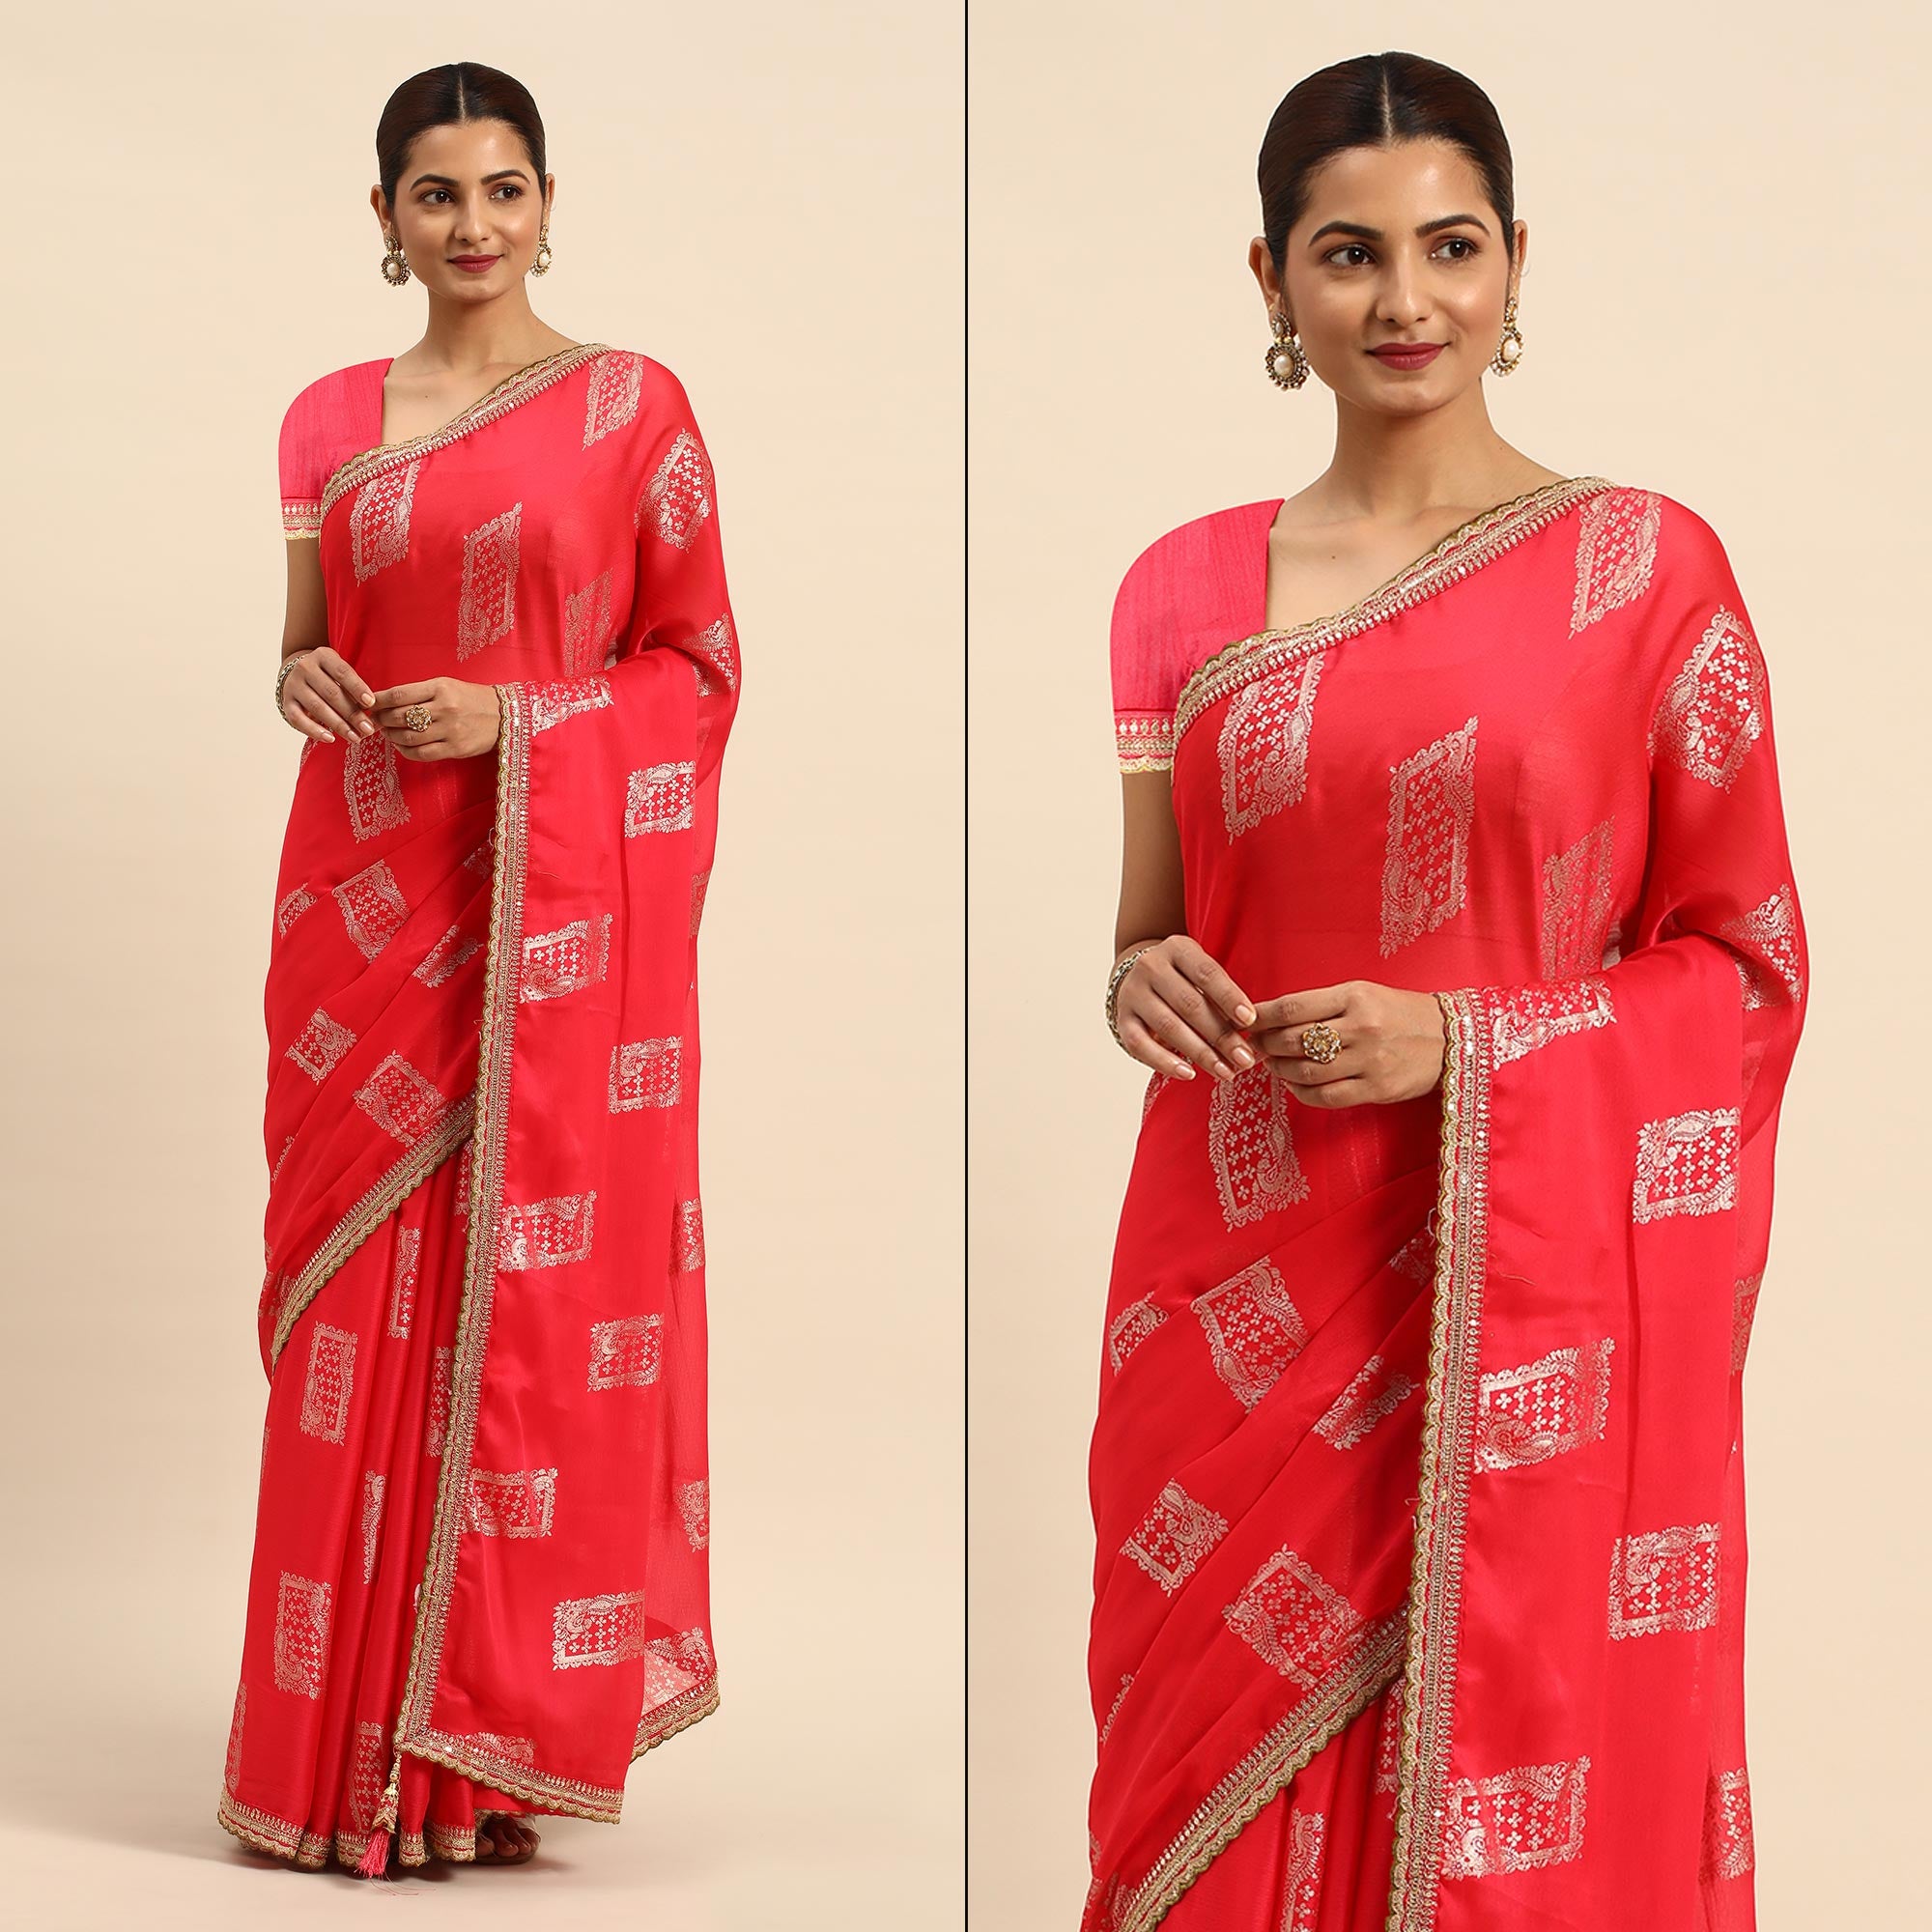 Pink Foil Printed With Embroidered Border Chiffon Saree